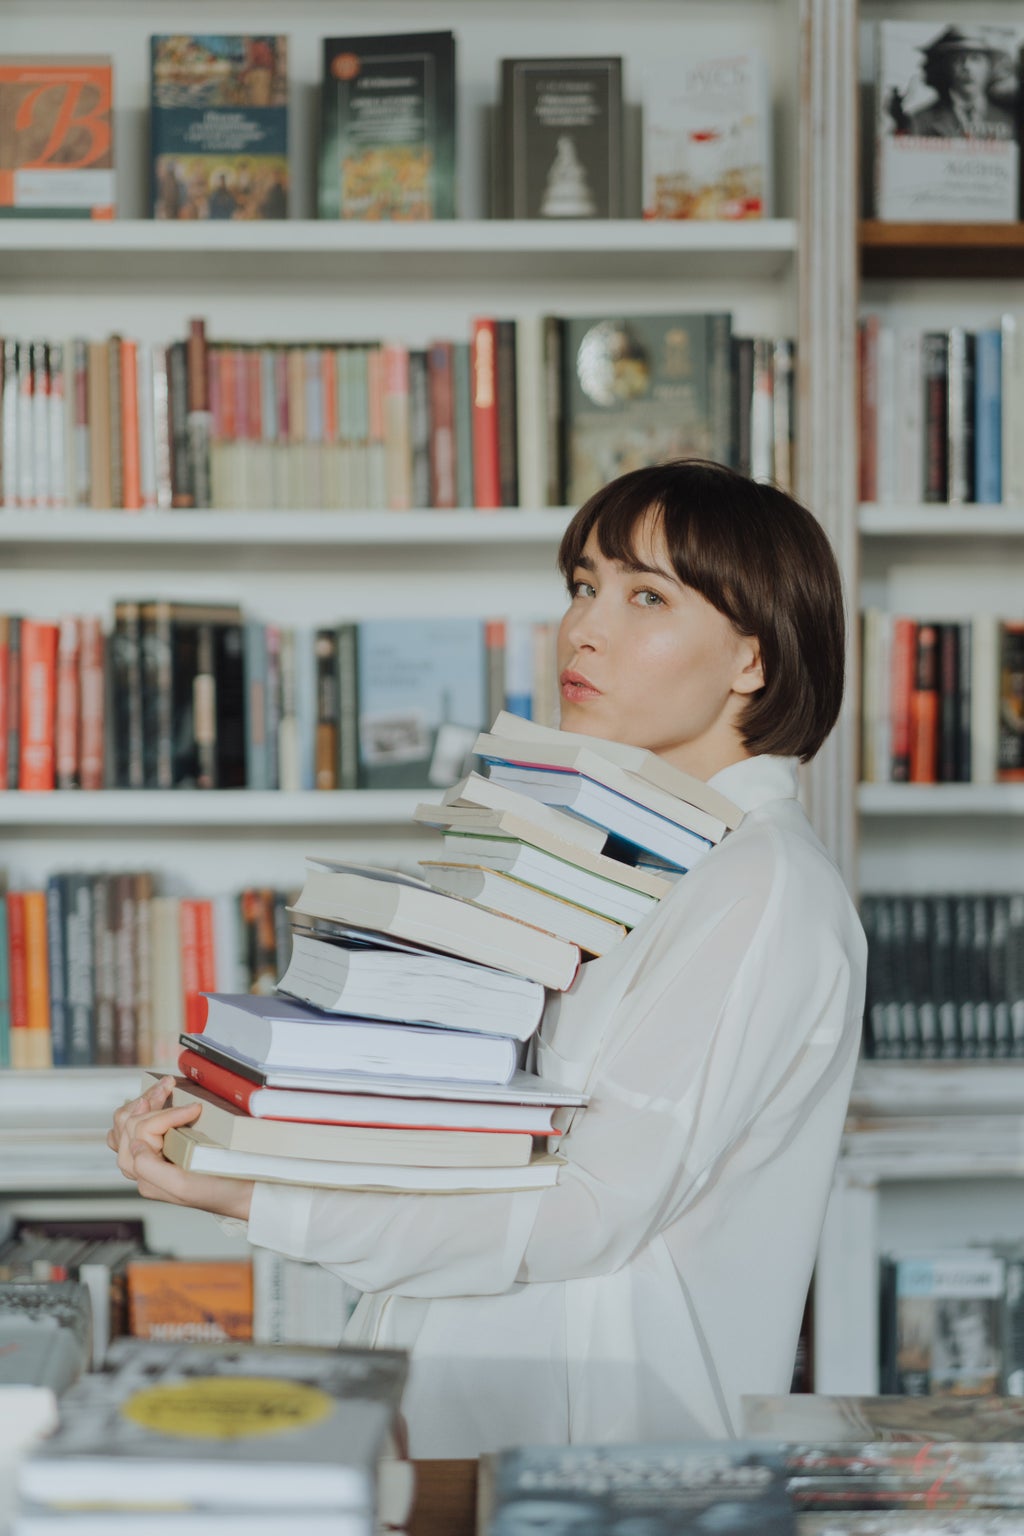 A woman in a white shirt carries a tall stack of books.